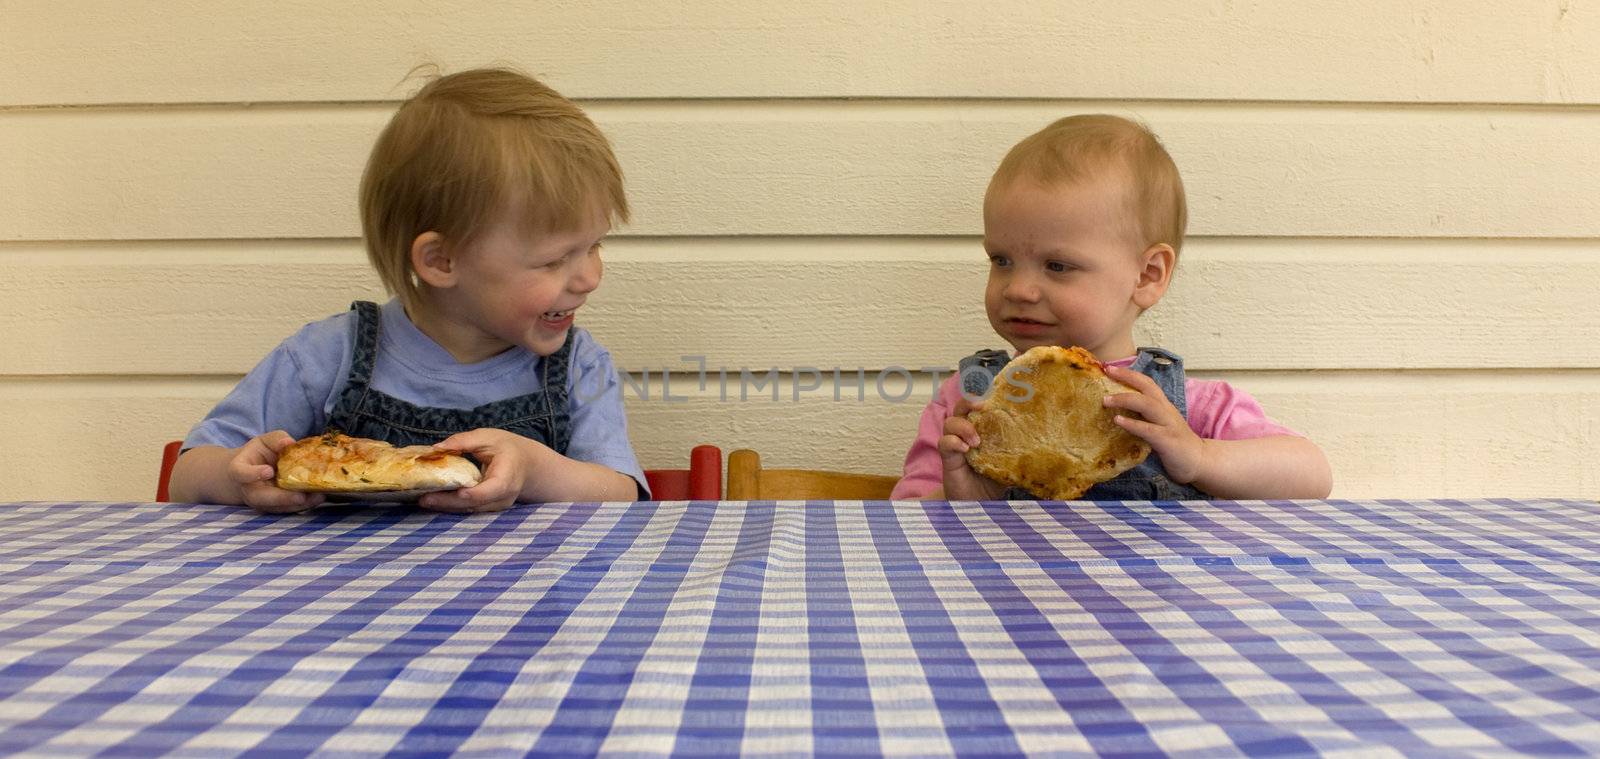 Children eating homemade rustique pizzas together